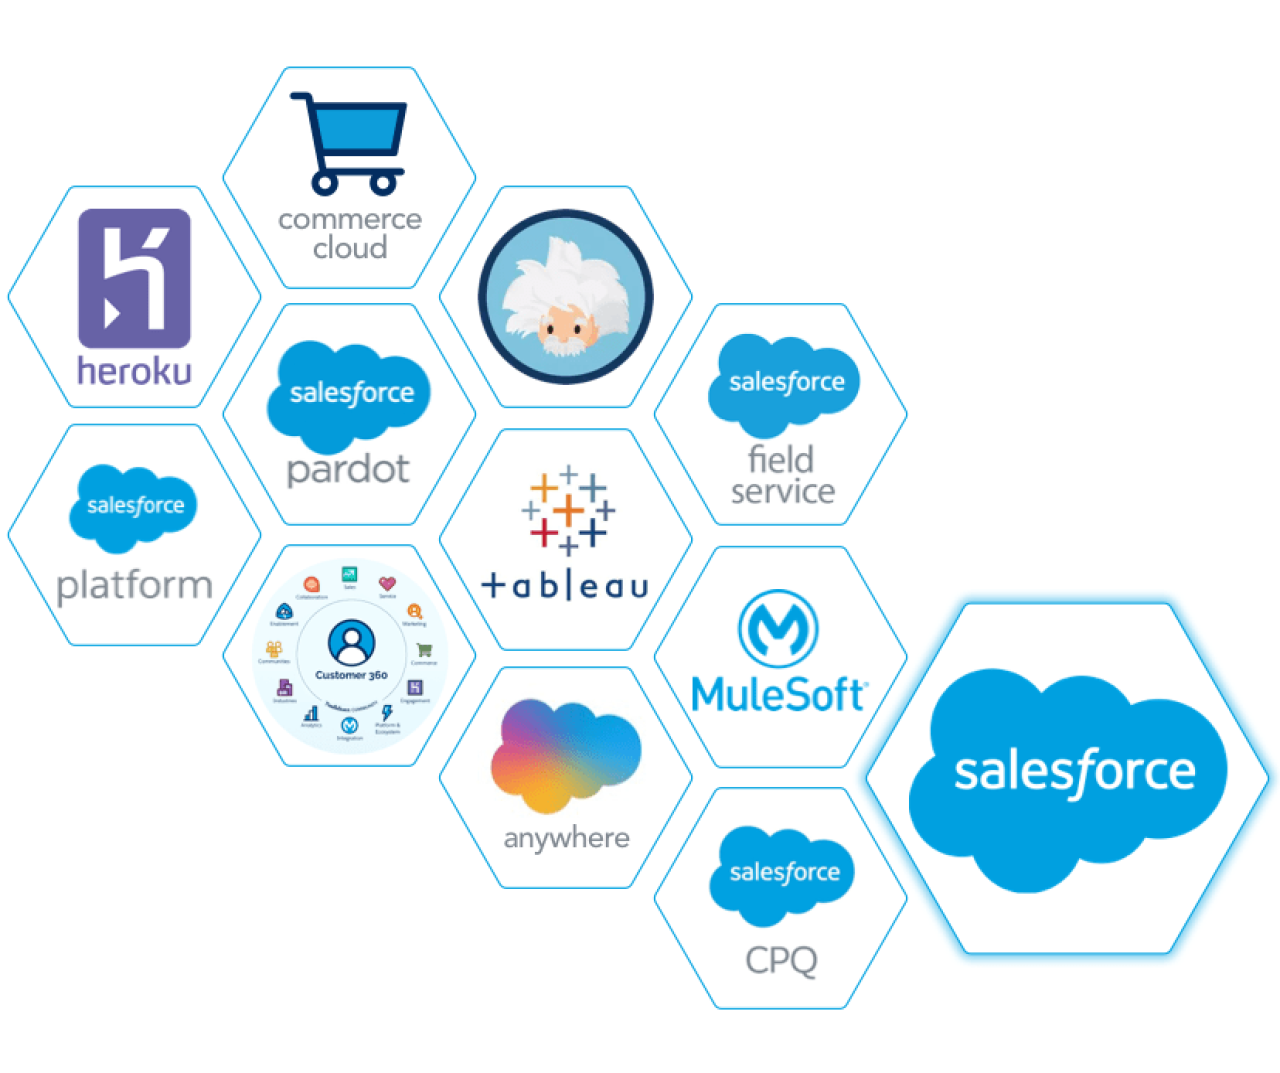 Salesforce Popular Implementations DB Services.